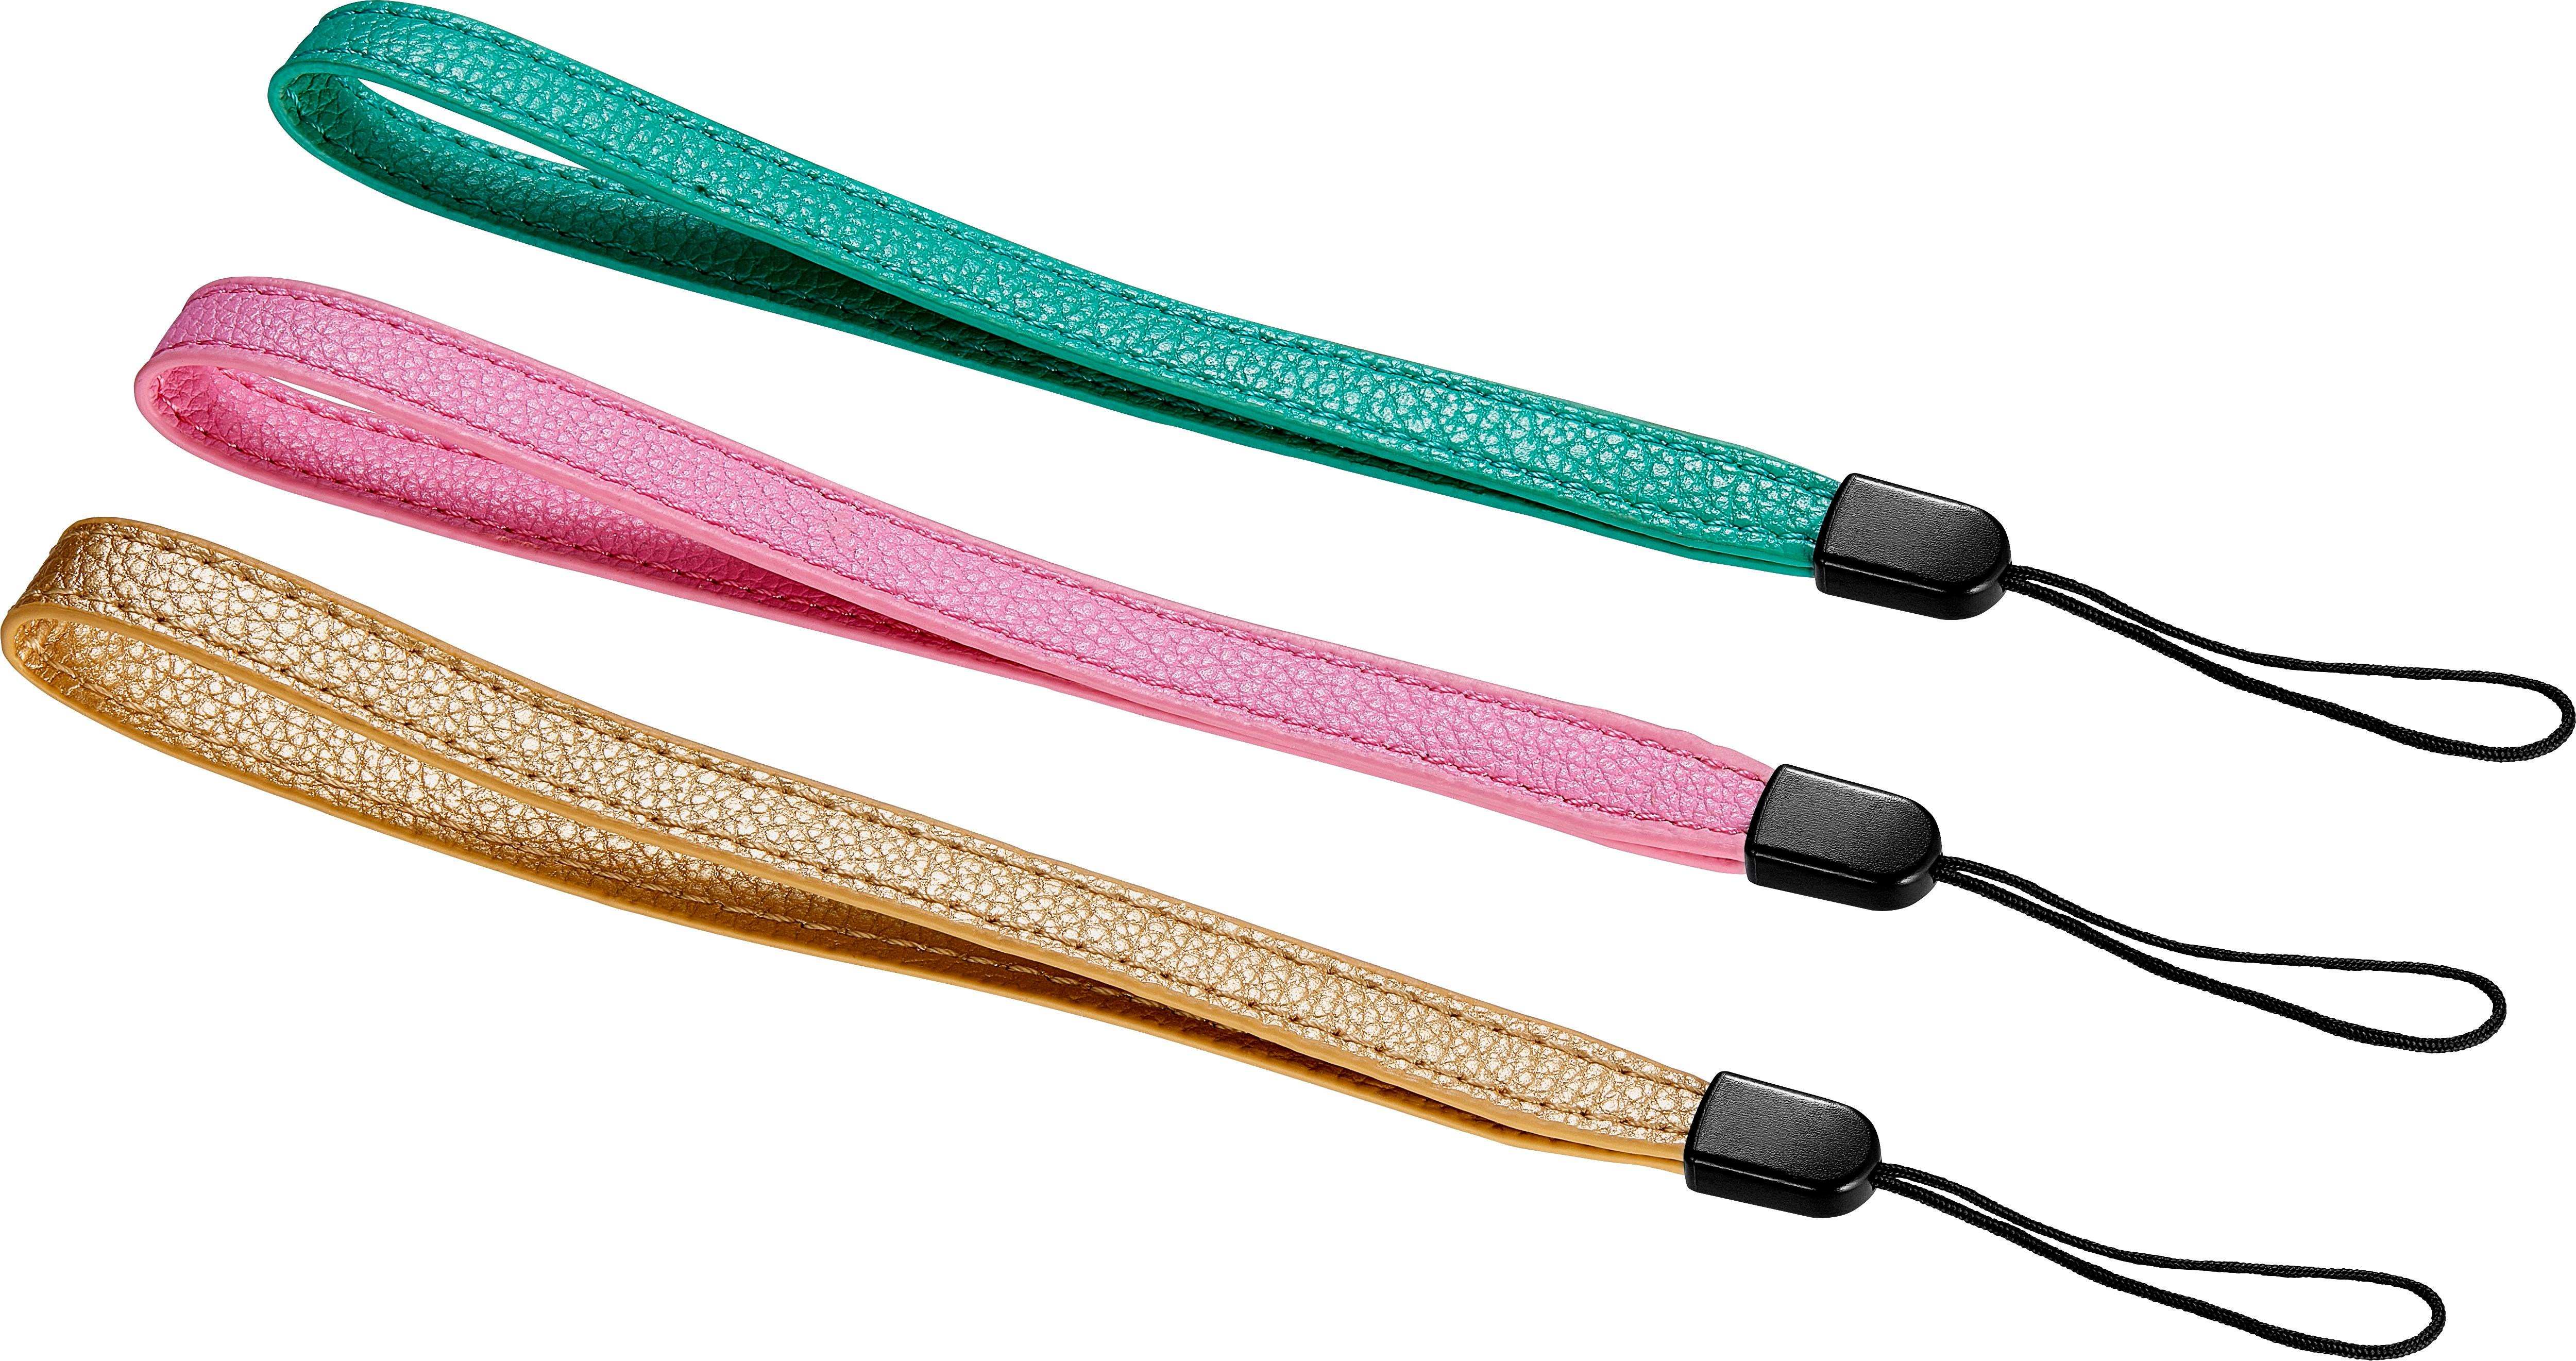 Modal™ Camera Wrist Strap (3-Pack) Pink/Teal/Gold MD-DICS3P - Best Buy